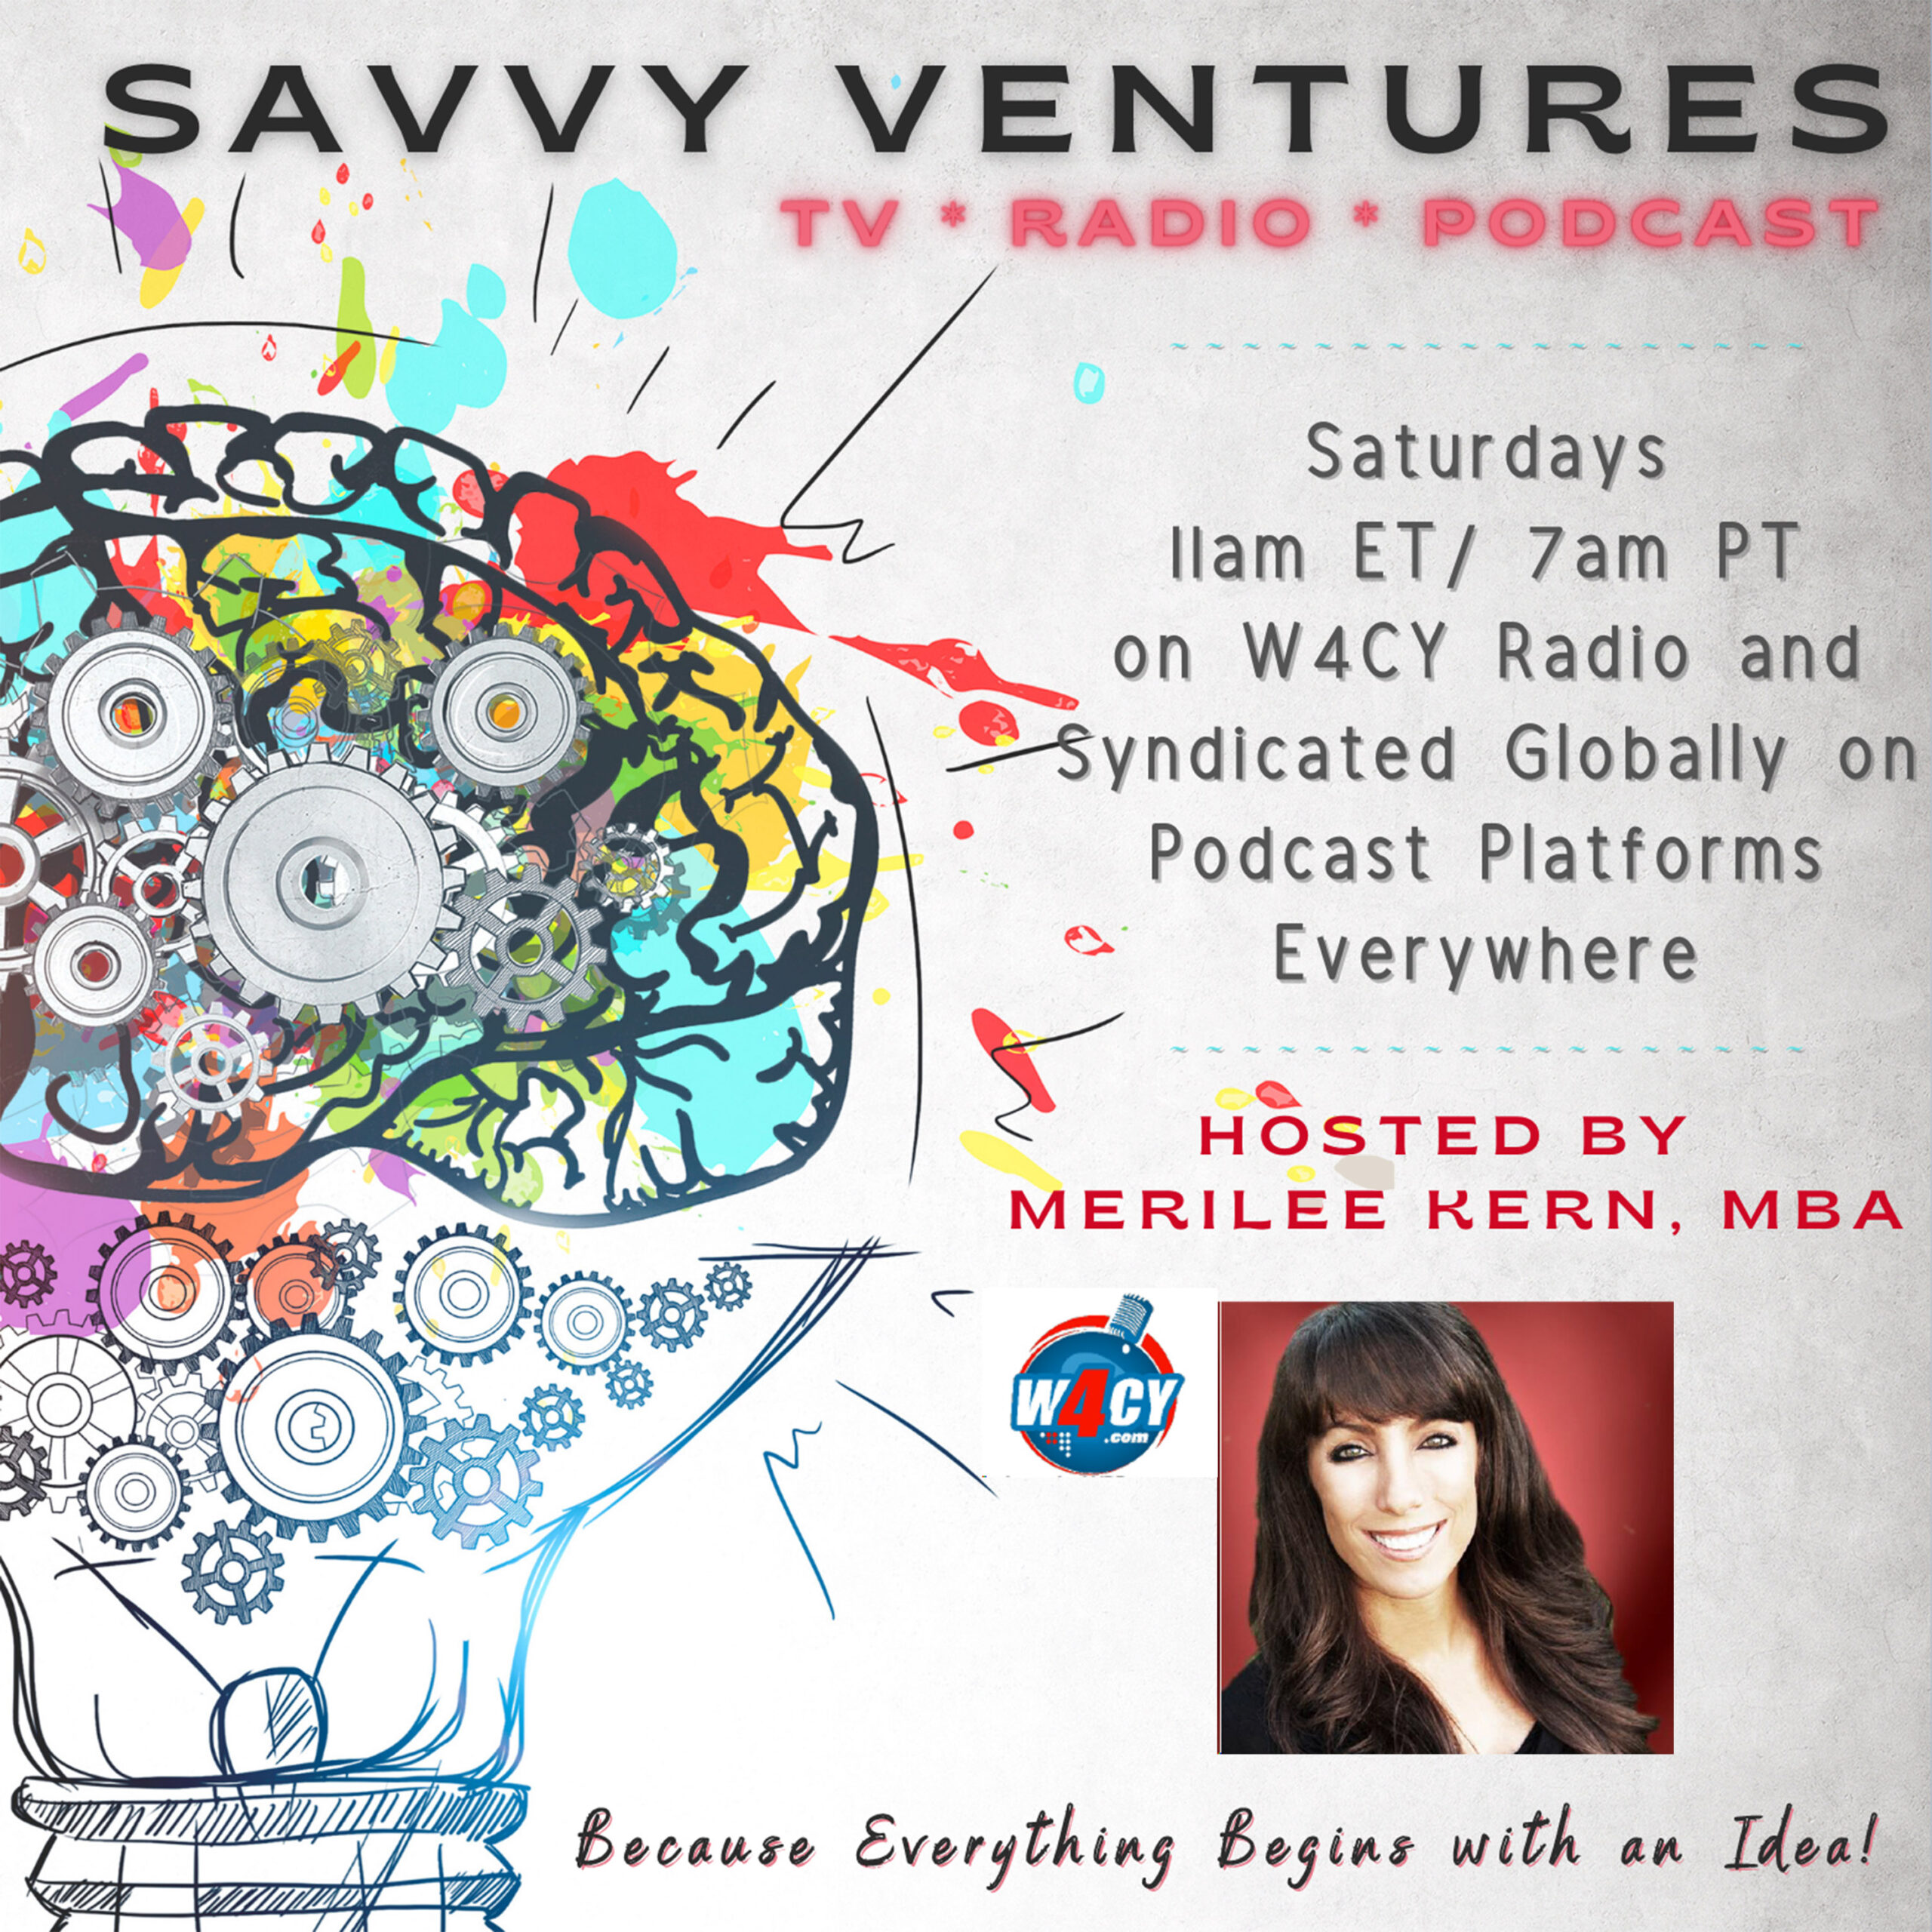 Savvy Ventures TV Show Expands with Exciting Global Podcast and Radio Show